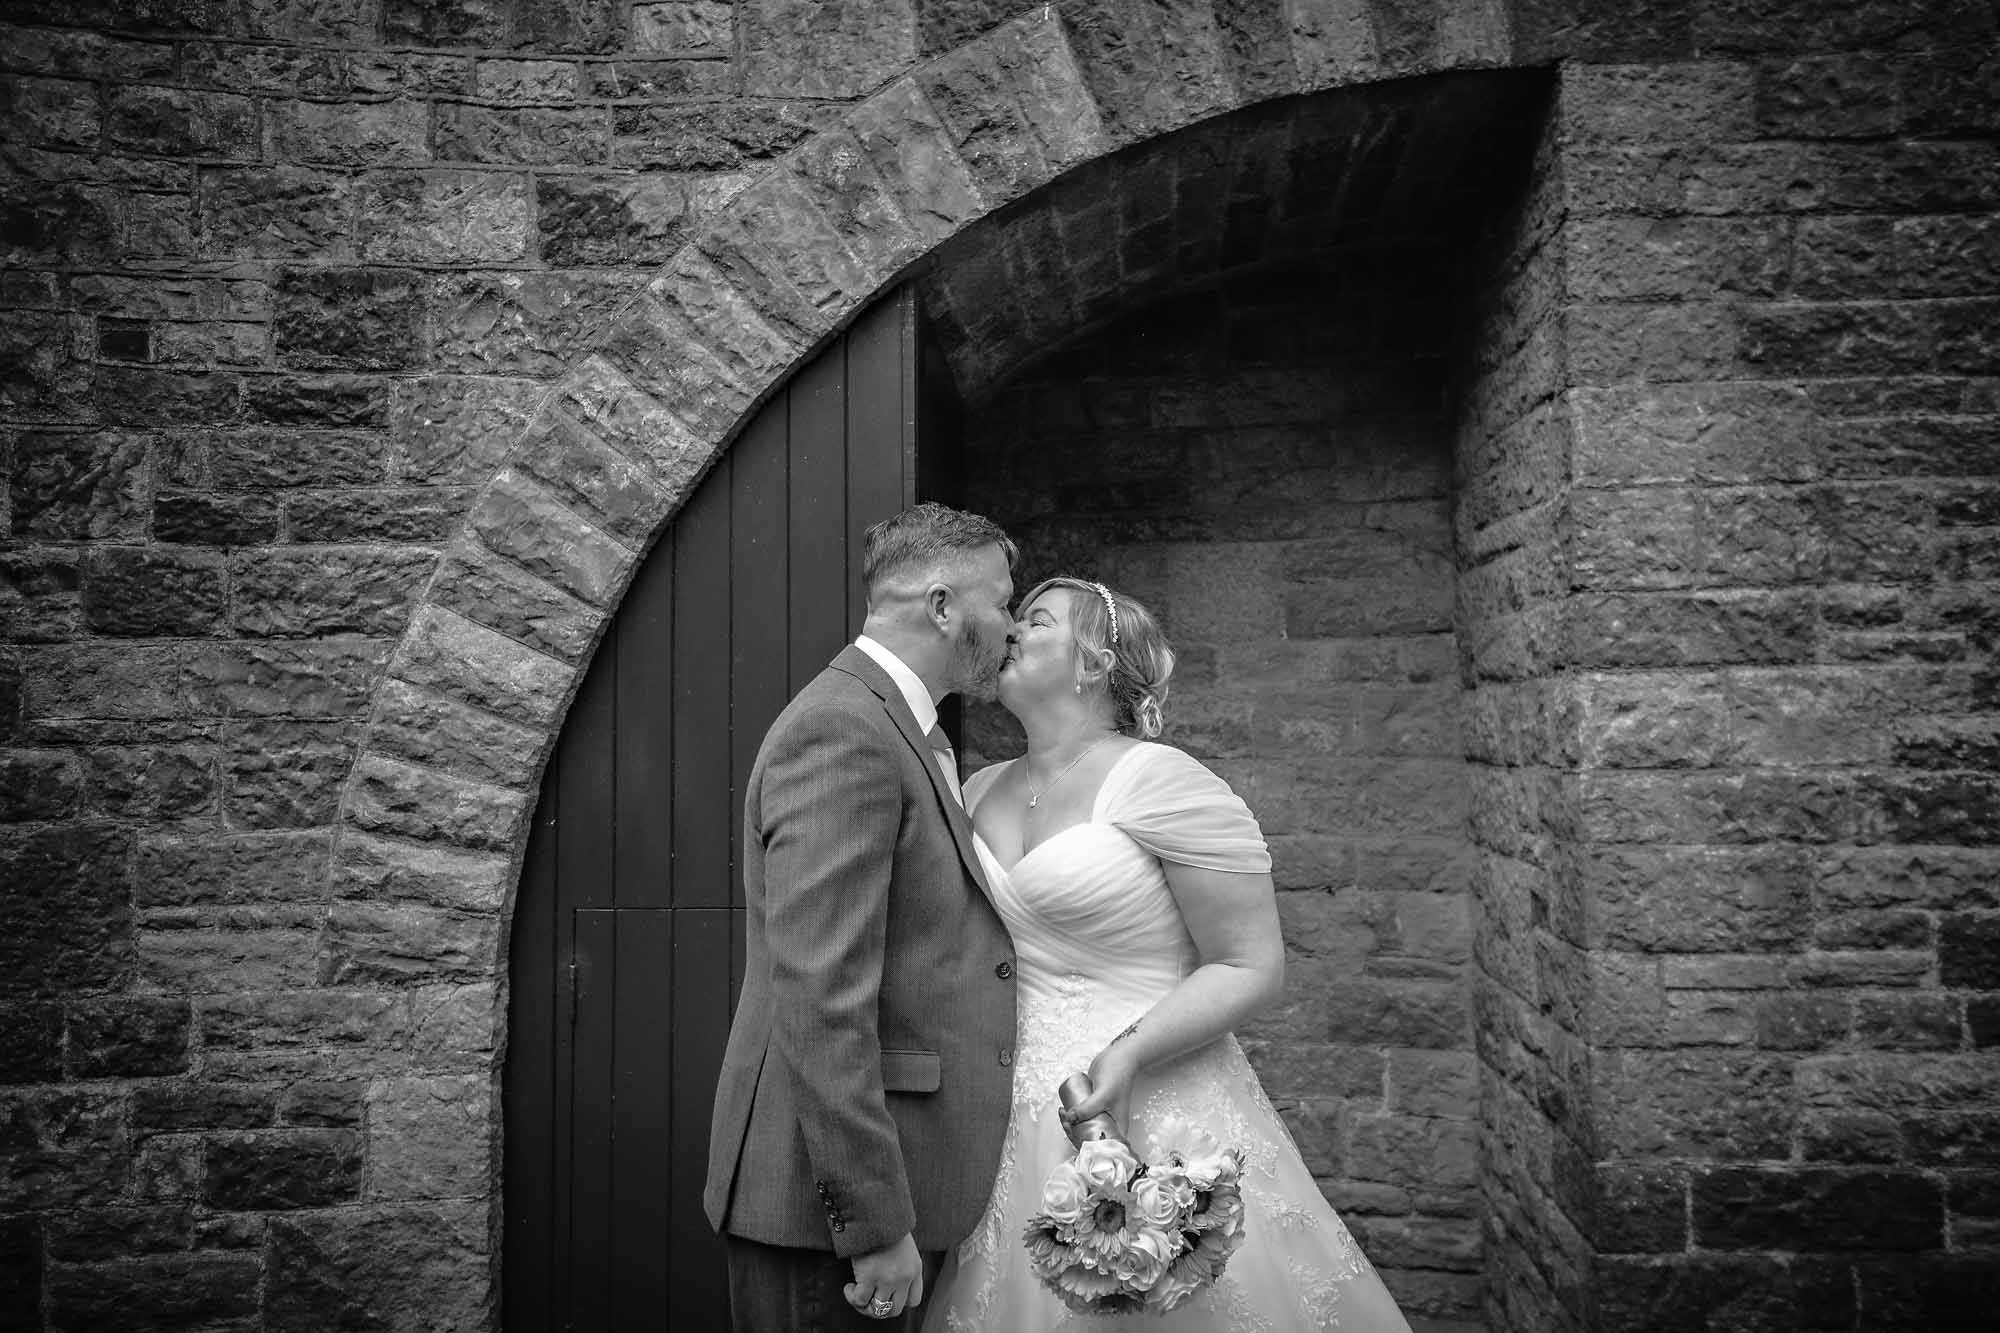 The groom kisses his bride after their ceremony at Castell Coch